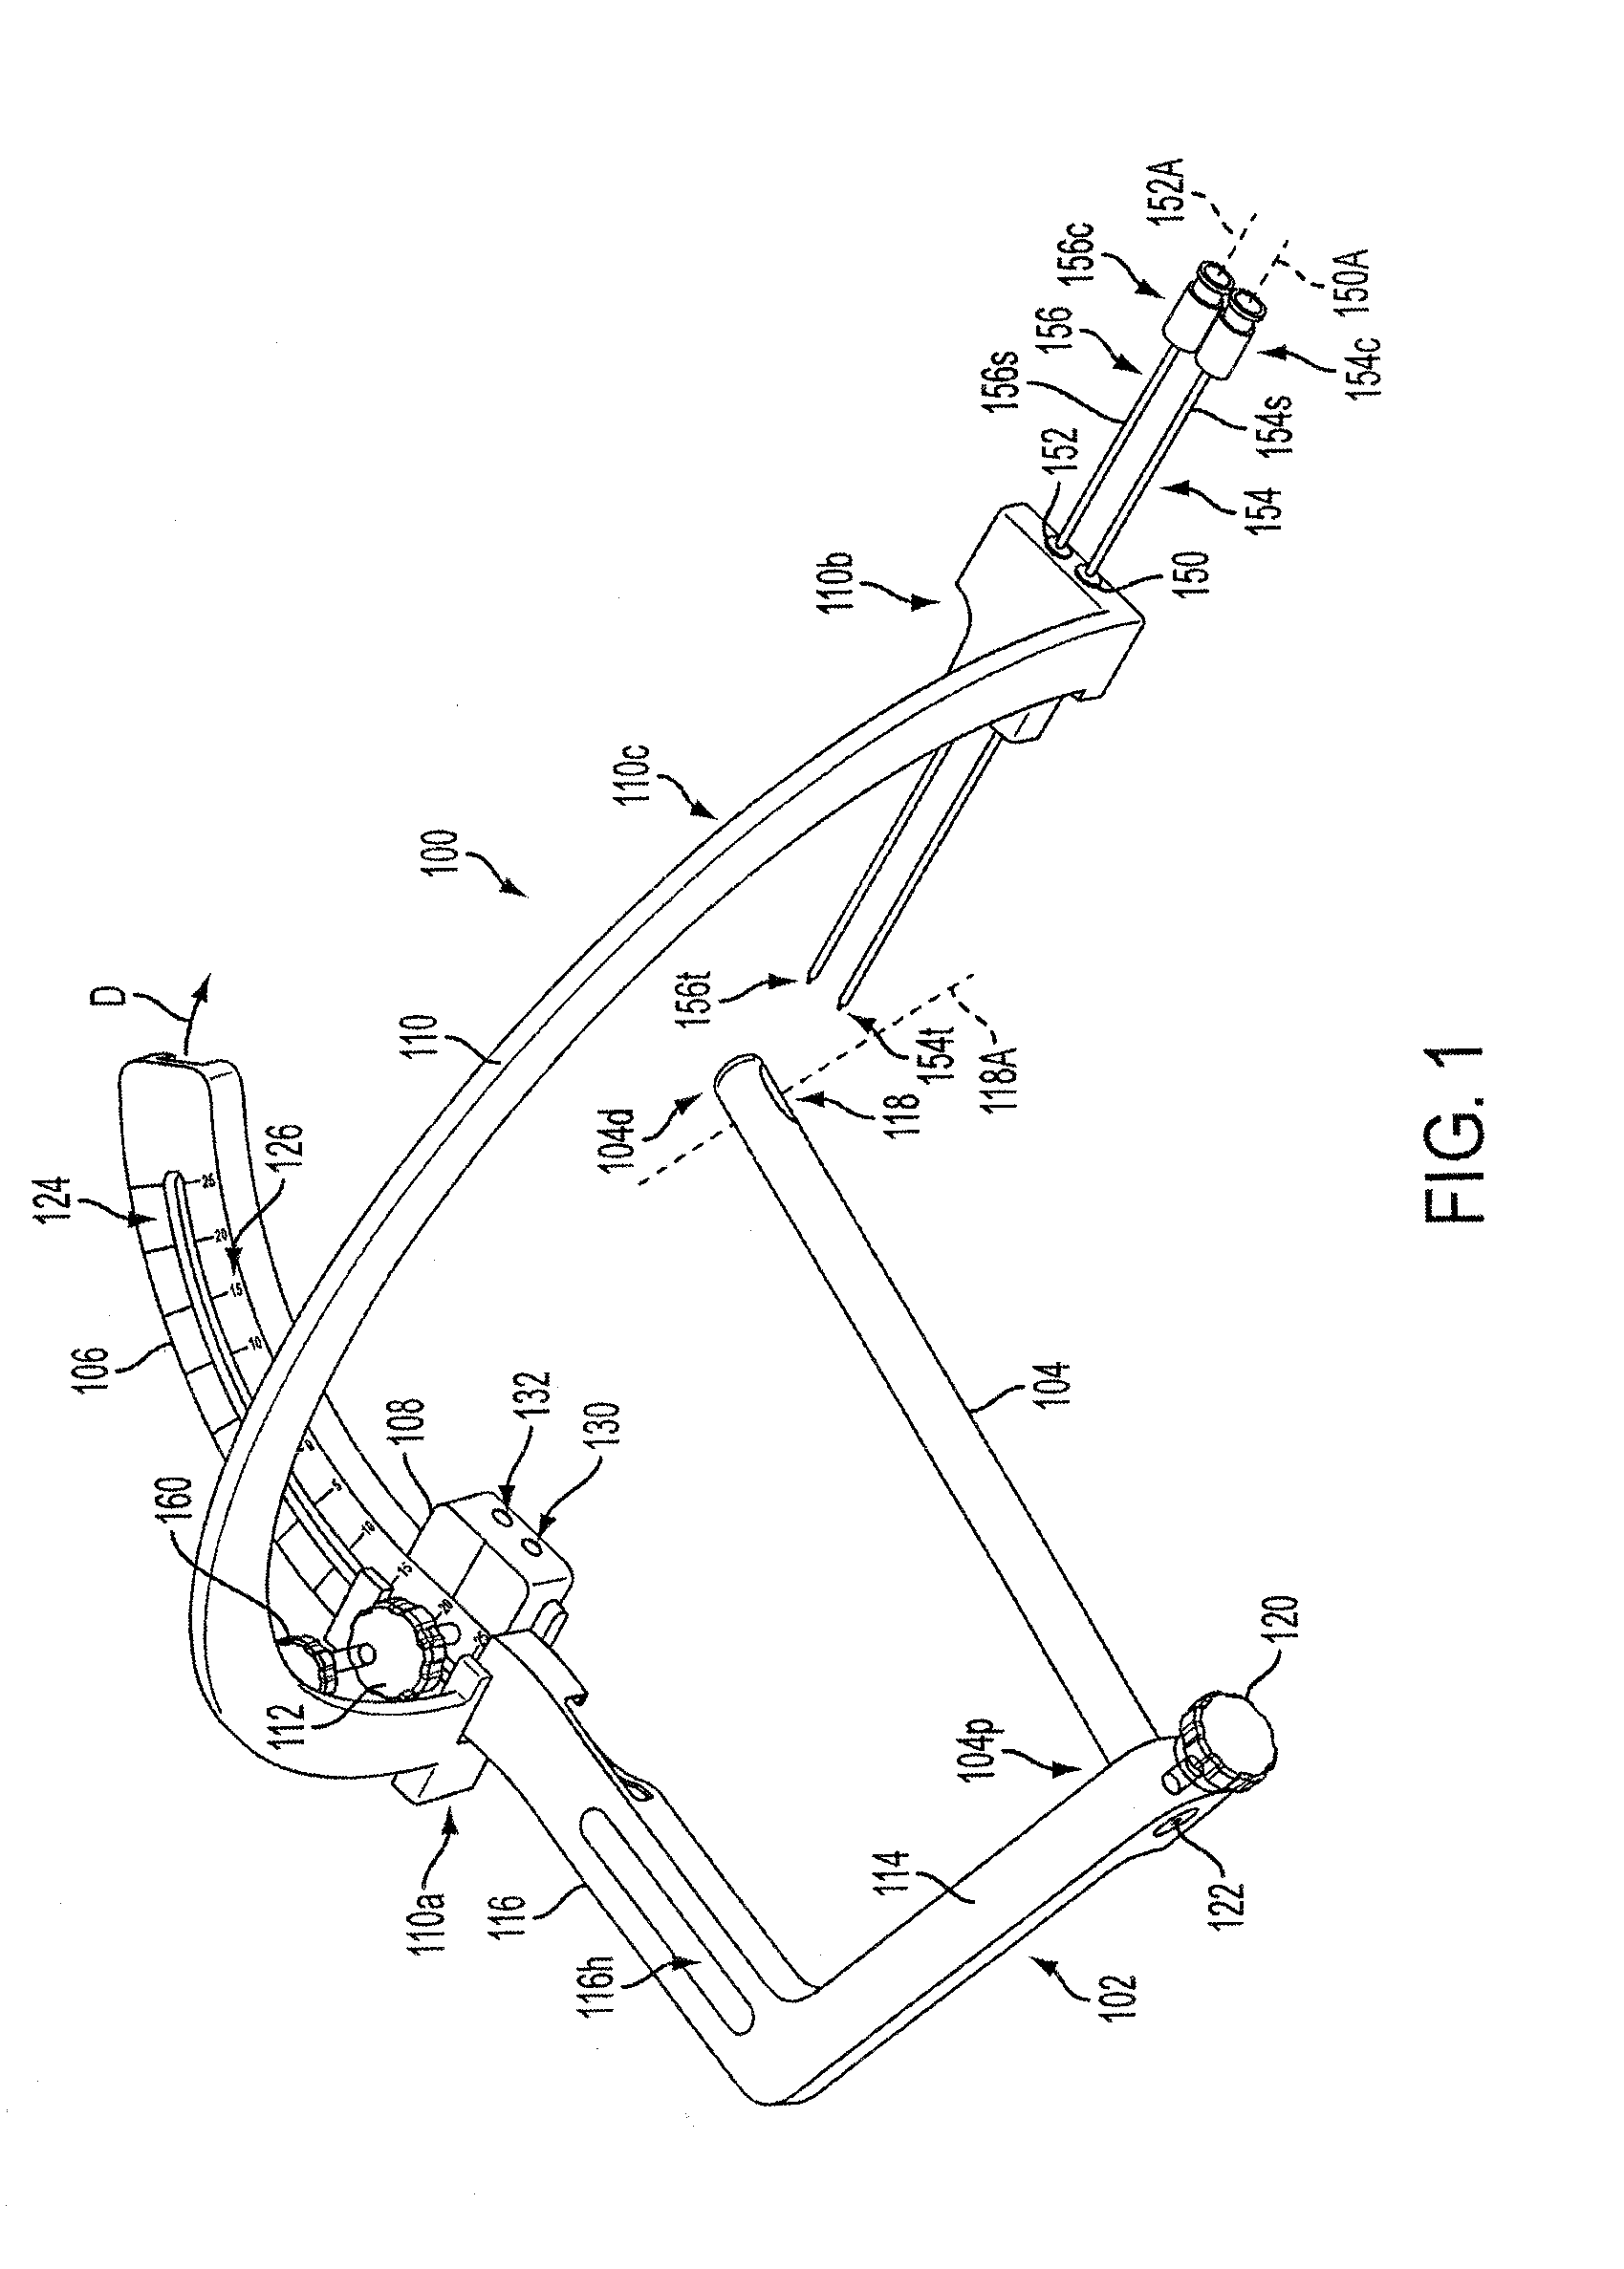 Cross Pinning Guide Devices and Methods